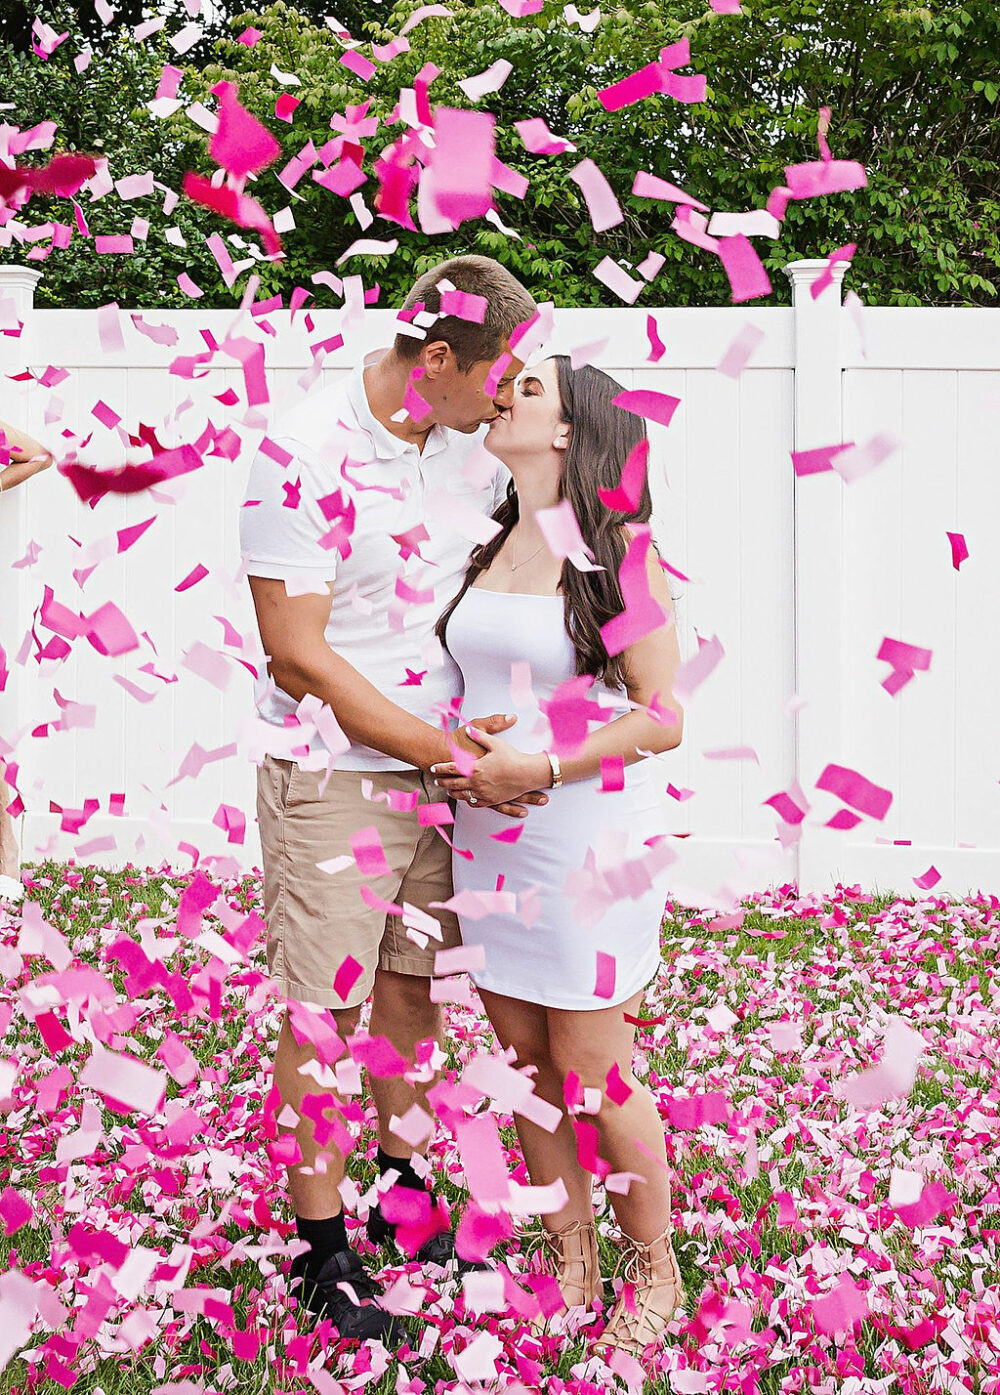 Man and woman standing in backyard with confetti around them, kissing for their gender reveal photo, shoot in Moorestown, New Jersey.